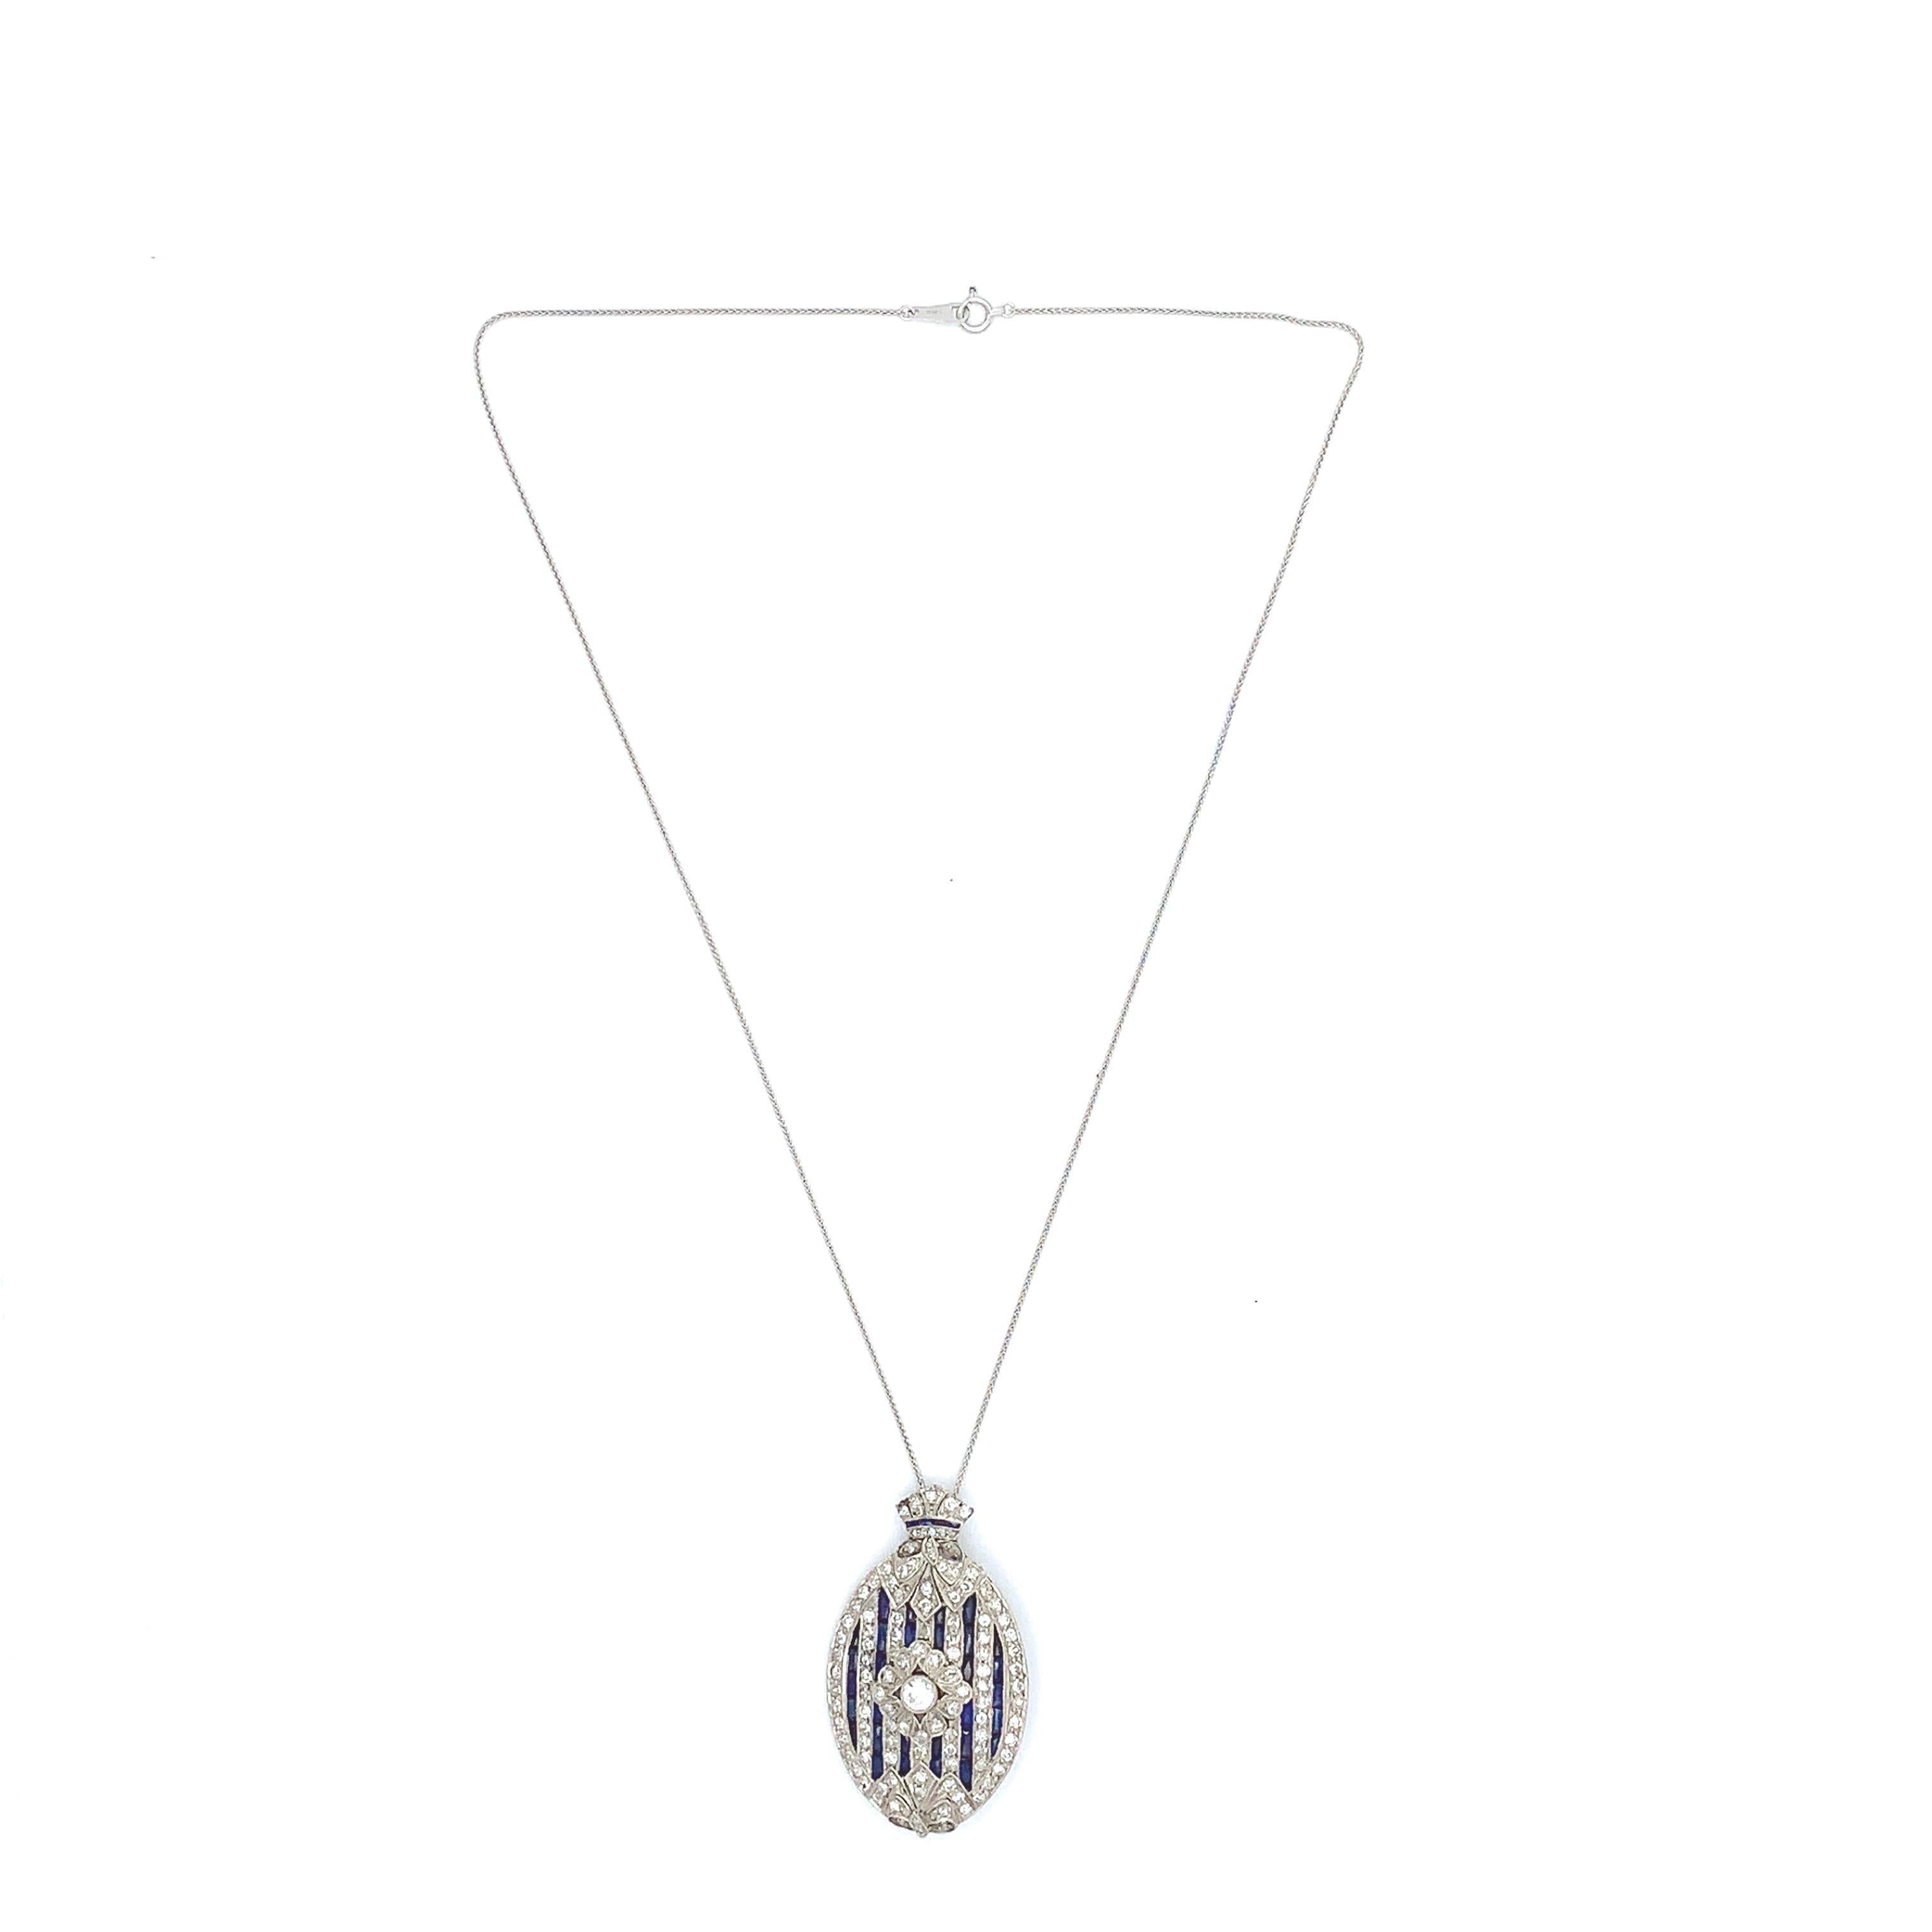 Platinum Art Deco pendant with 2 carats of diamonds accented by specialty French calibre cut synthetic sapphires. Beautiful design with bows and a central rosette. There are about 117 round transitional and single cut diamonds weighing a total of 2